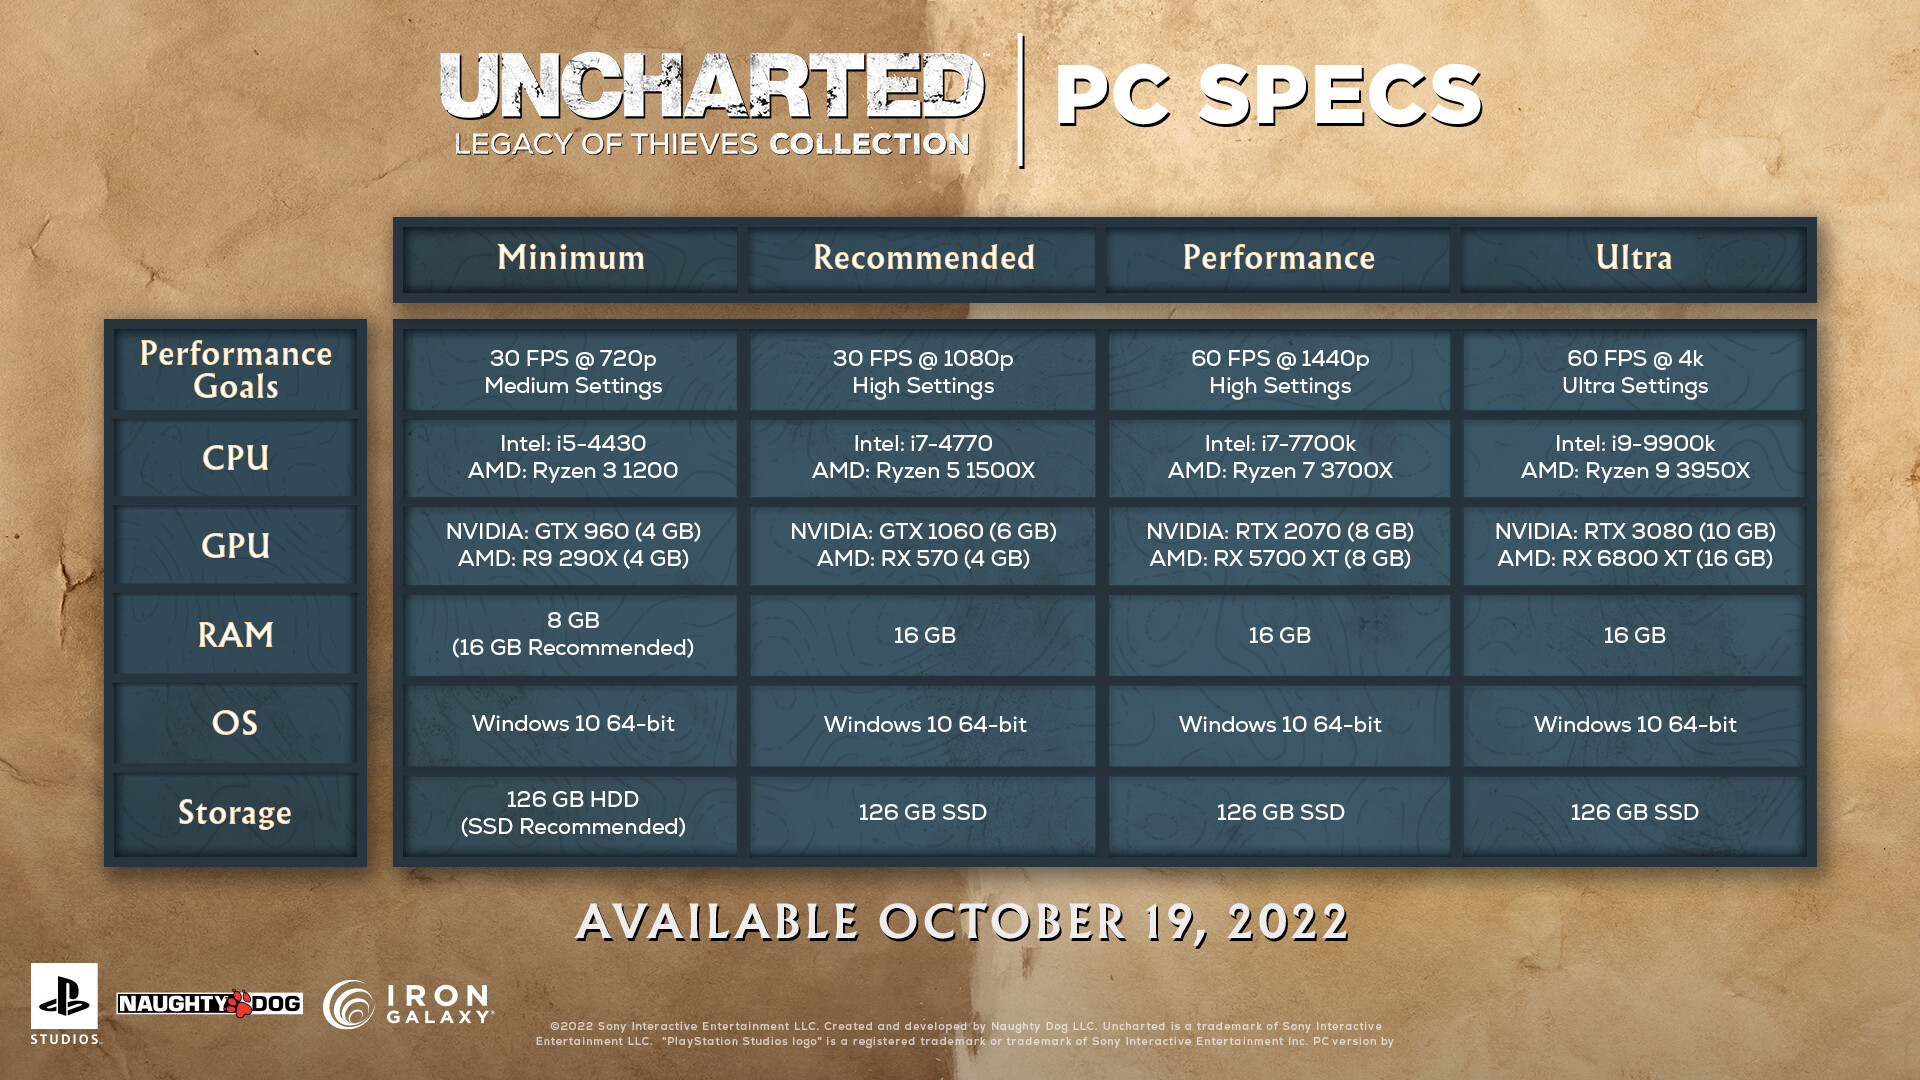 Abyss Raiders: Uncharted System Requirements - Can I Run It? -  PCGameBenchmark